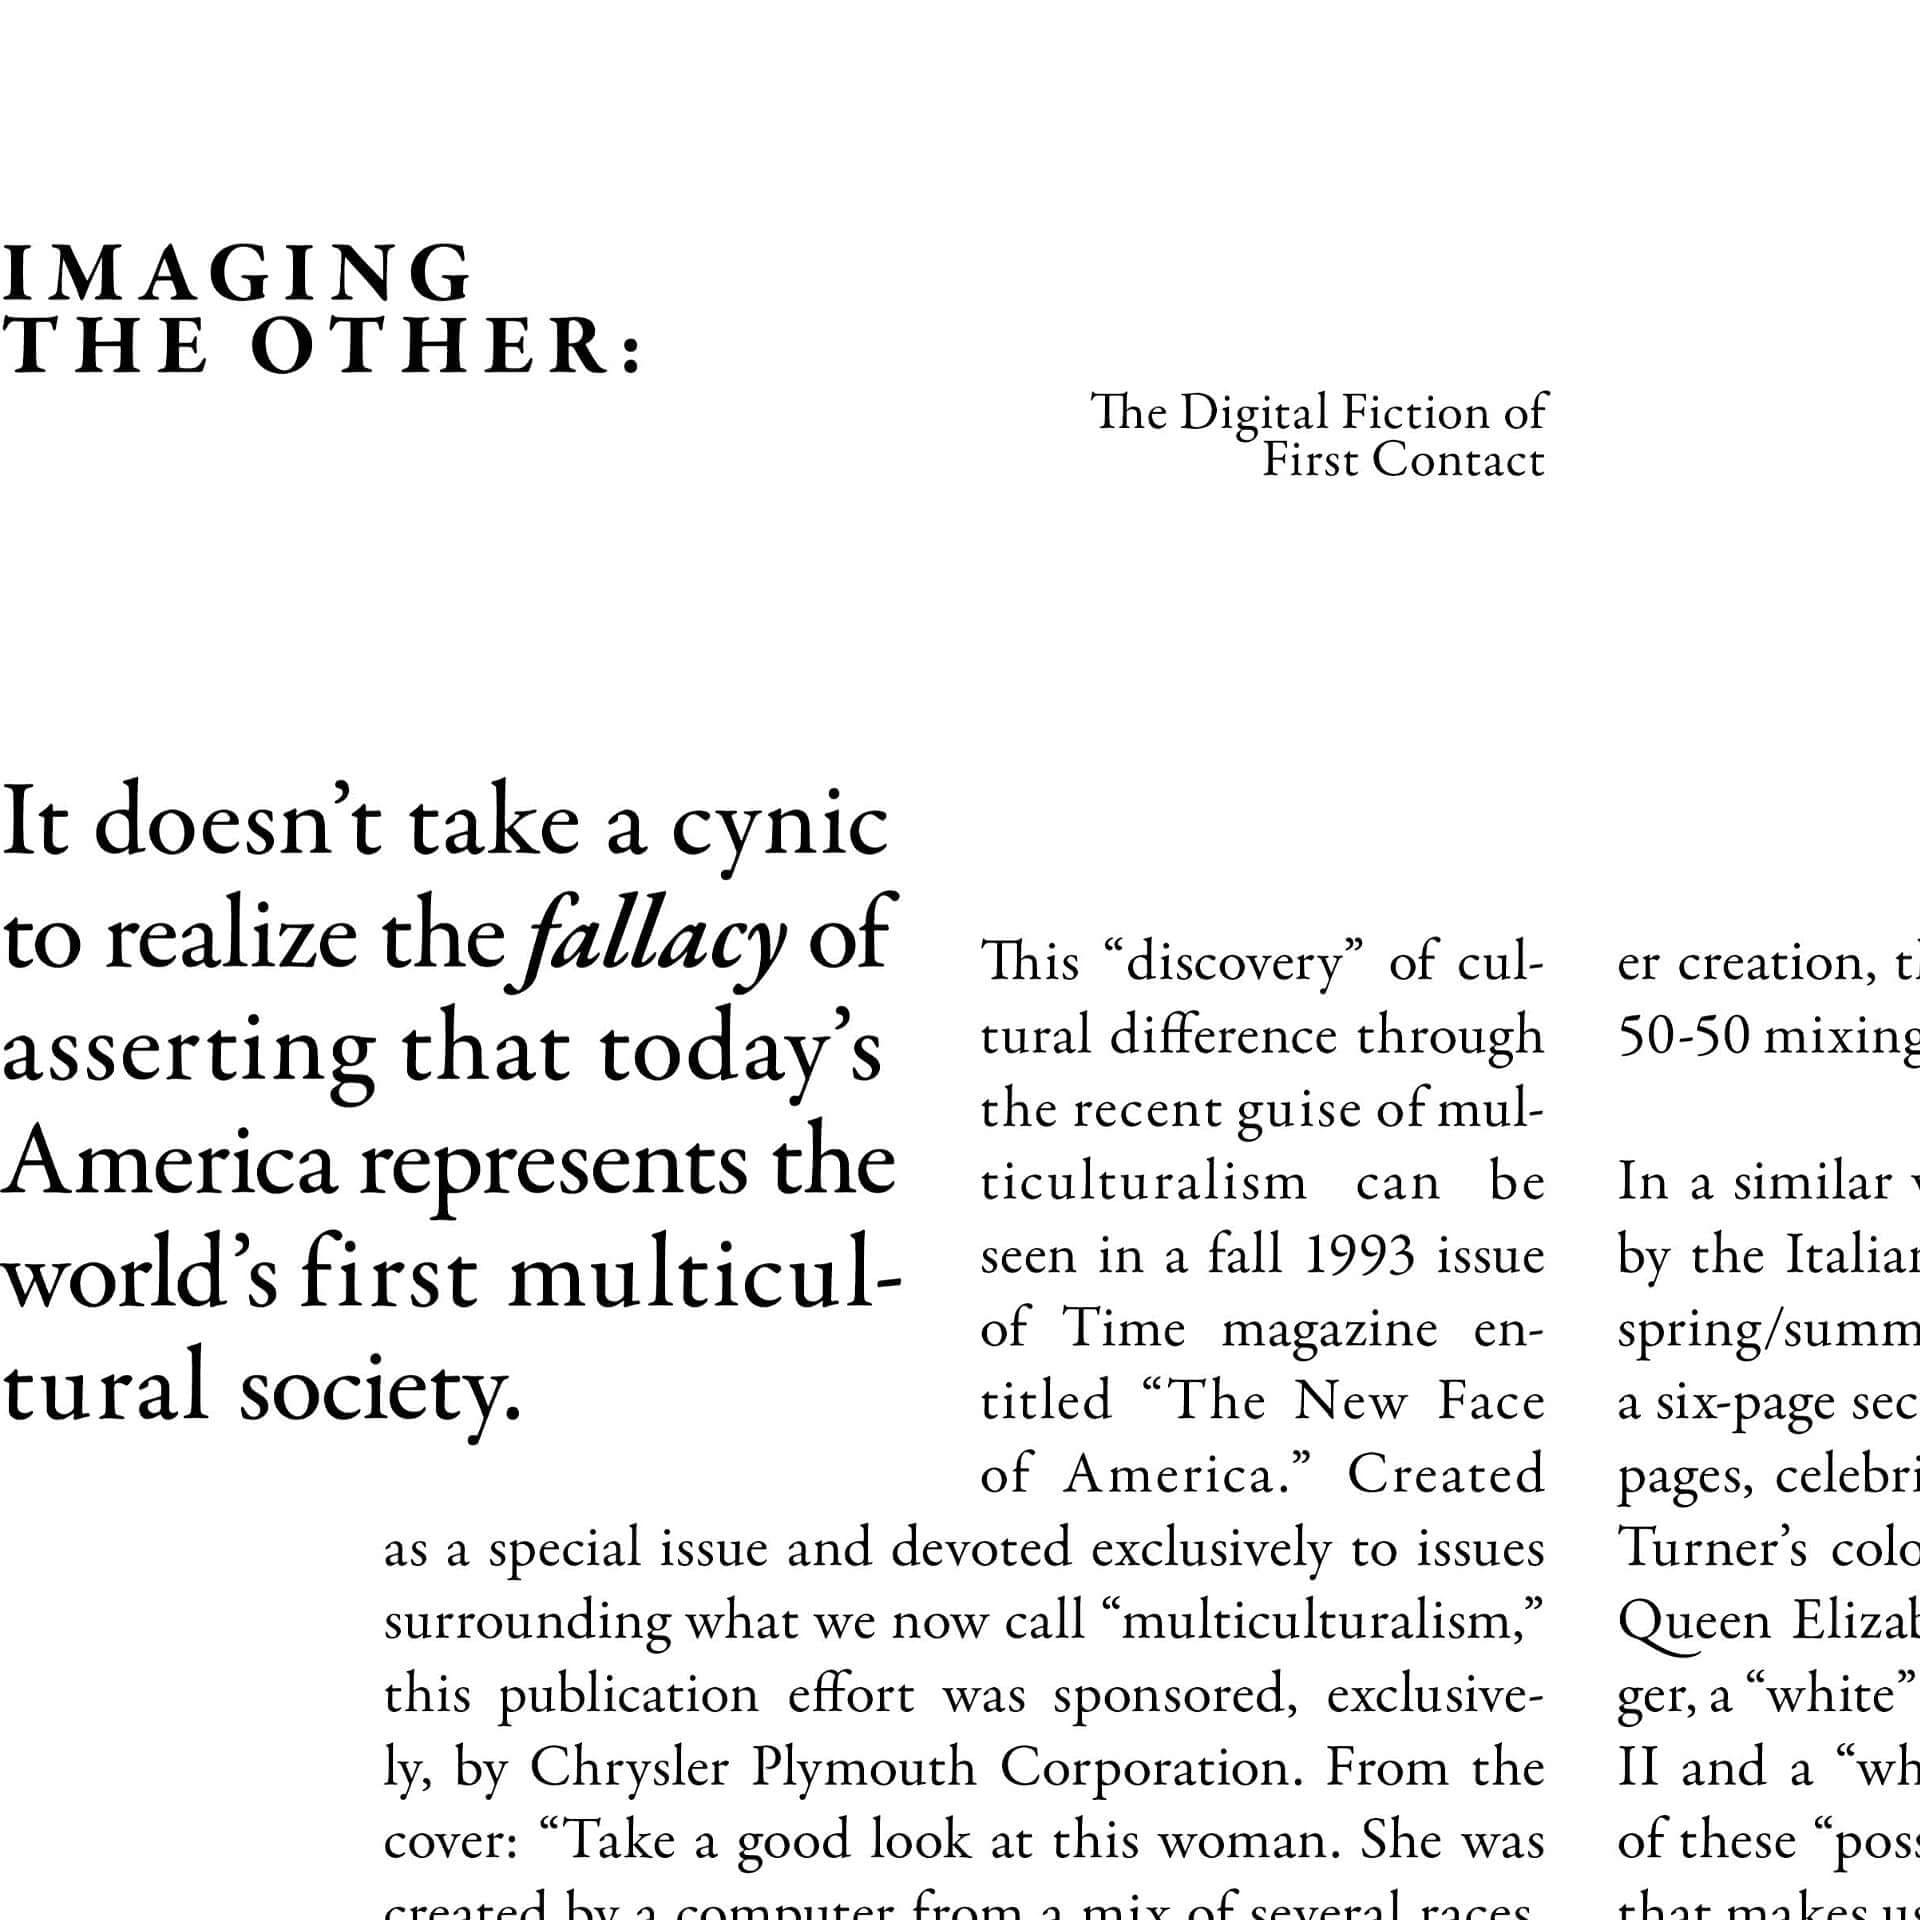 Book layout using content from In And Around: Cultures Of Design And The Design Of Cultures by Andrew Blauvelt. Depicts a white page with average black text, resembling a novel, with the header "Imagining the Other".